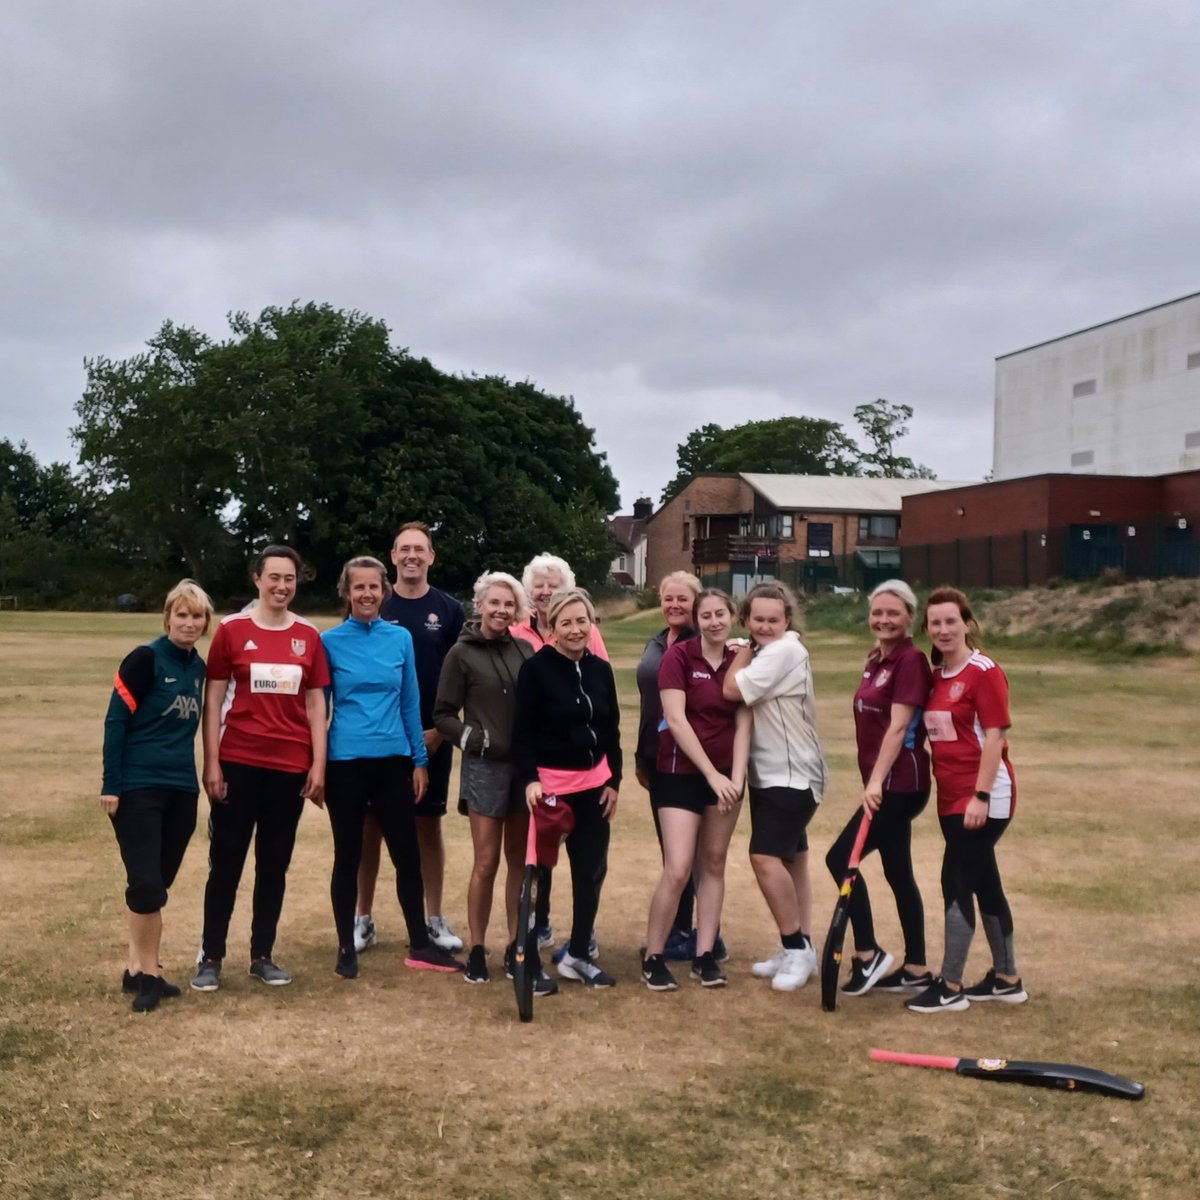 Great Softball session with @oxcc_women tonight focusing on batting and scoring shots. Lots of laughs & great to see the progress. 

#womenscricket #thisgirlcan #wegotgame #softballcricket